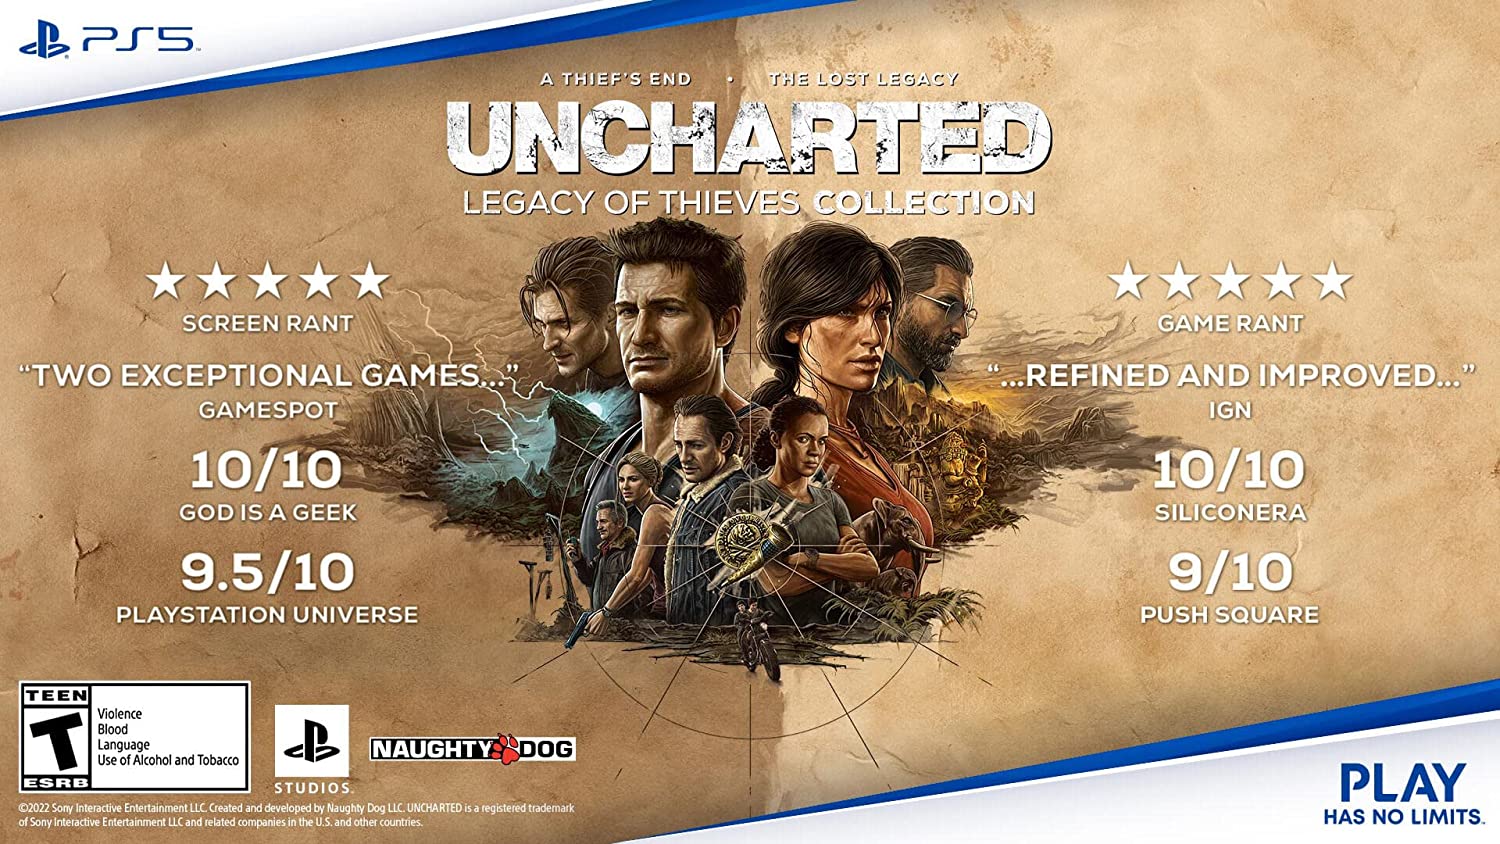 Legacy of thieves collection купить. Uncharted 4 ps5. Плейстейшен 5 анчартед Легаси. Uncharted collection ps5. Uncharted: Legacy of Thieves collection.